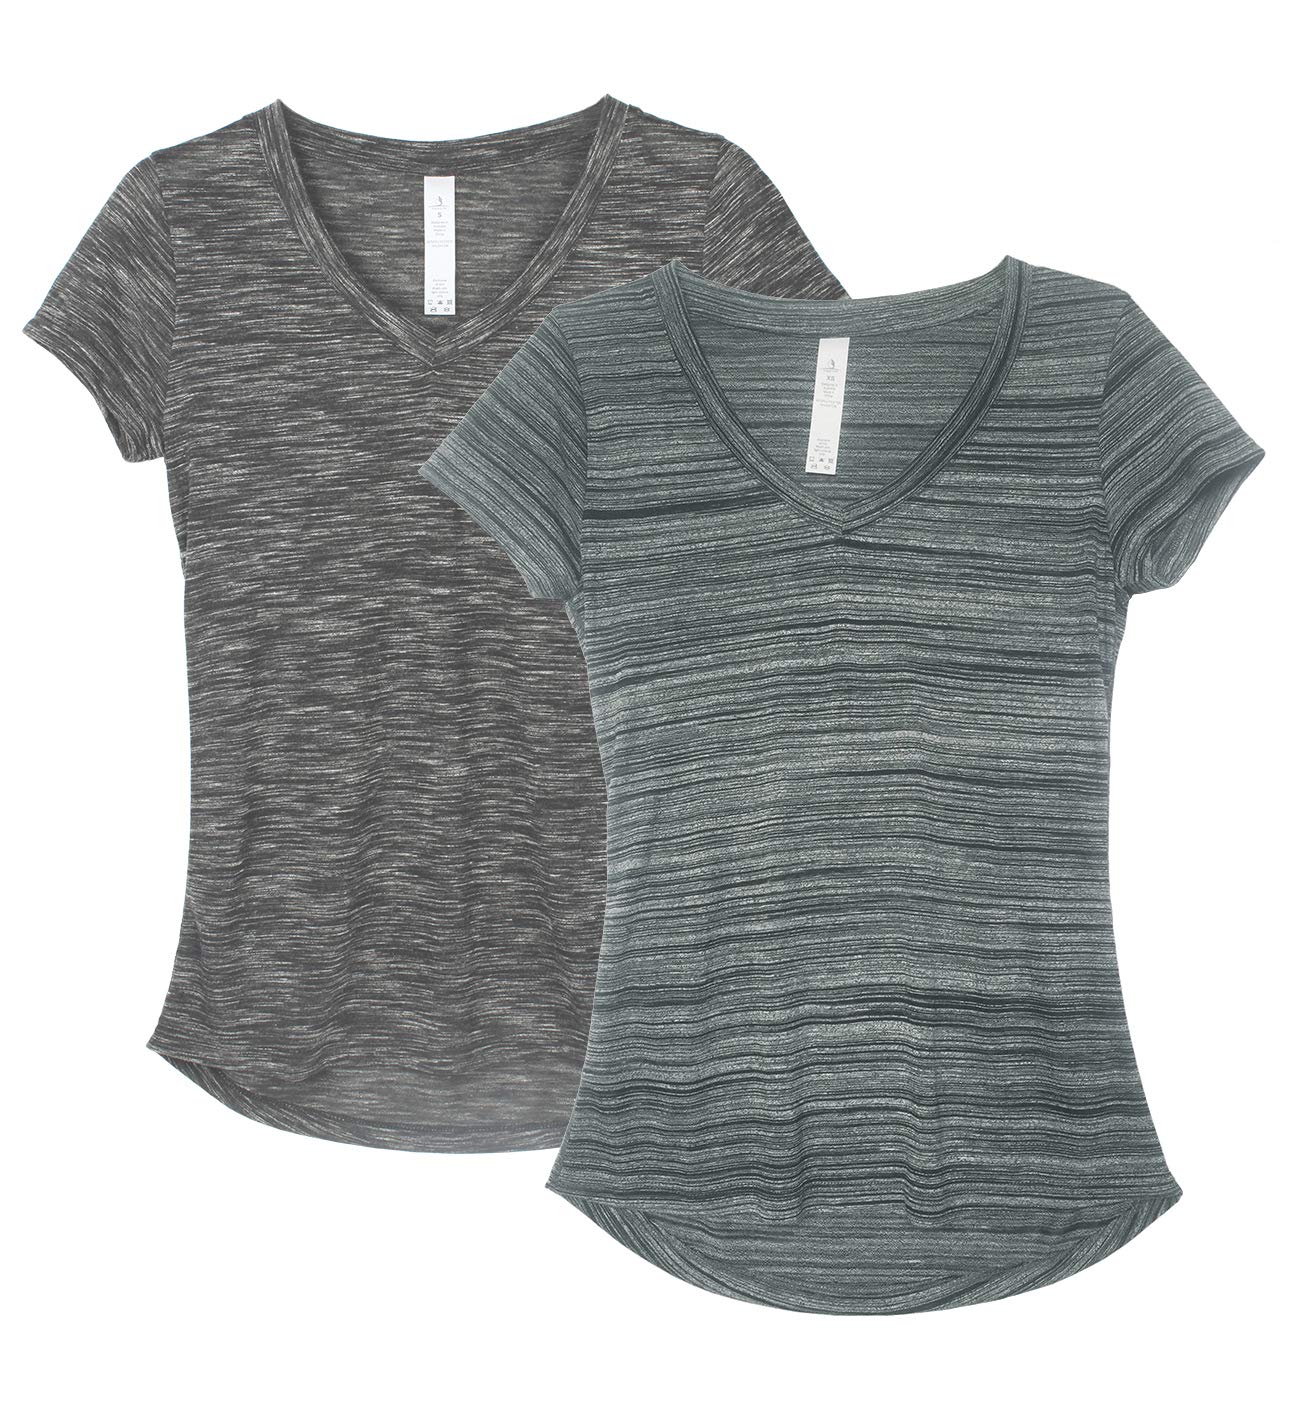 icyzone Women's Workout Shirts V-Neck Yoga Gym Tops Lightweight Casual Sports T-Shirts, 2-Pack